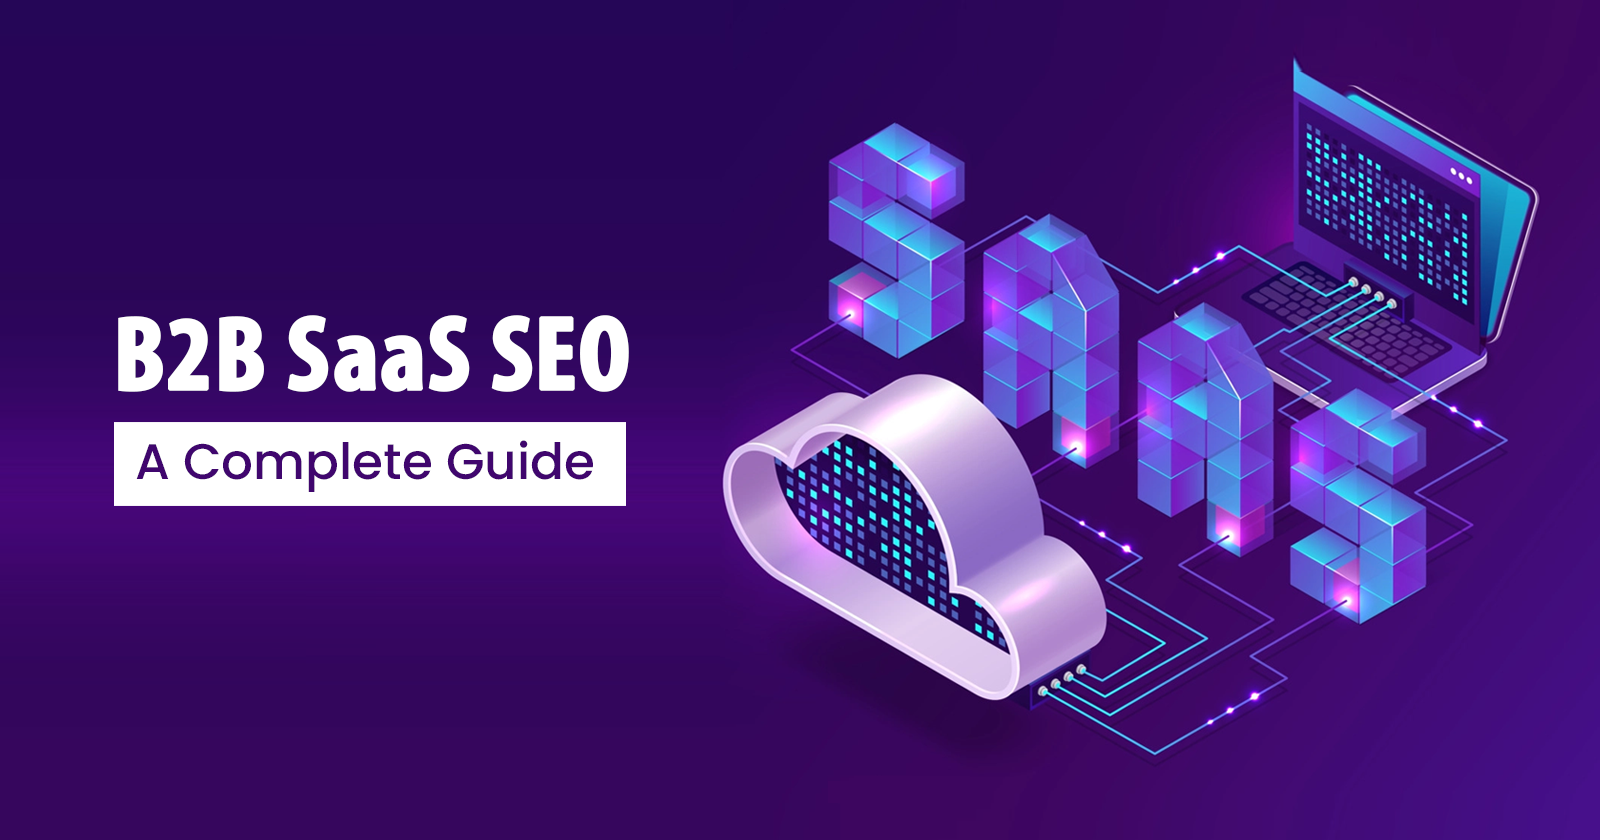 Everything You Need to Know About B2B SaaS SEO